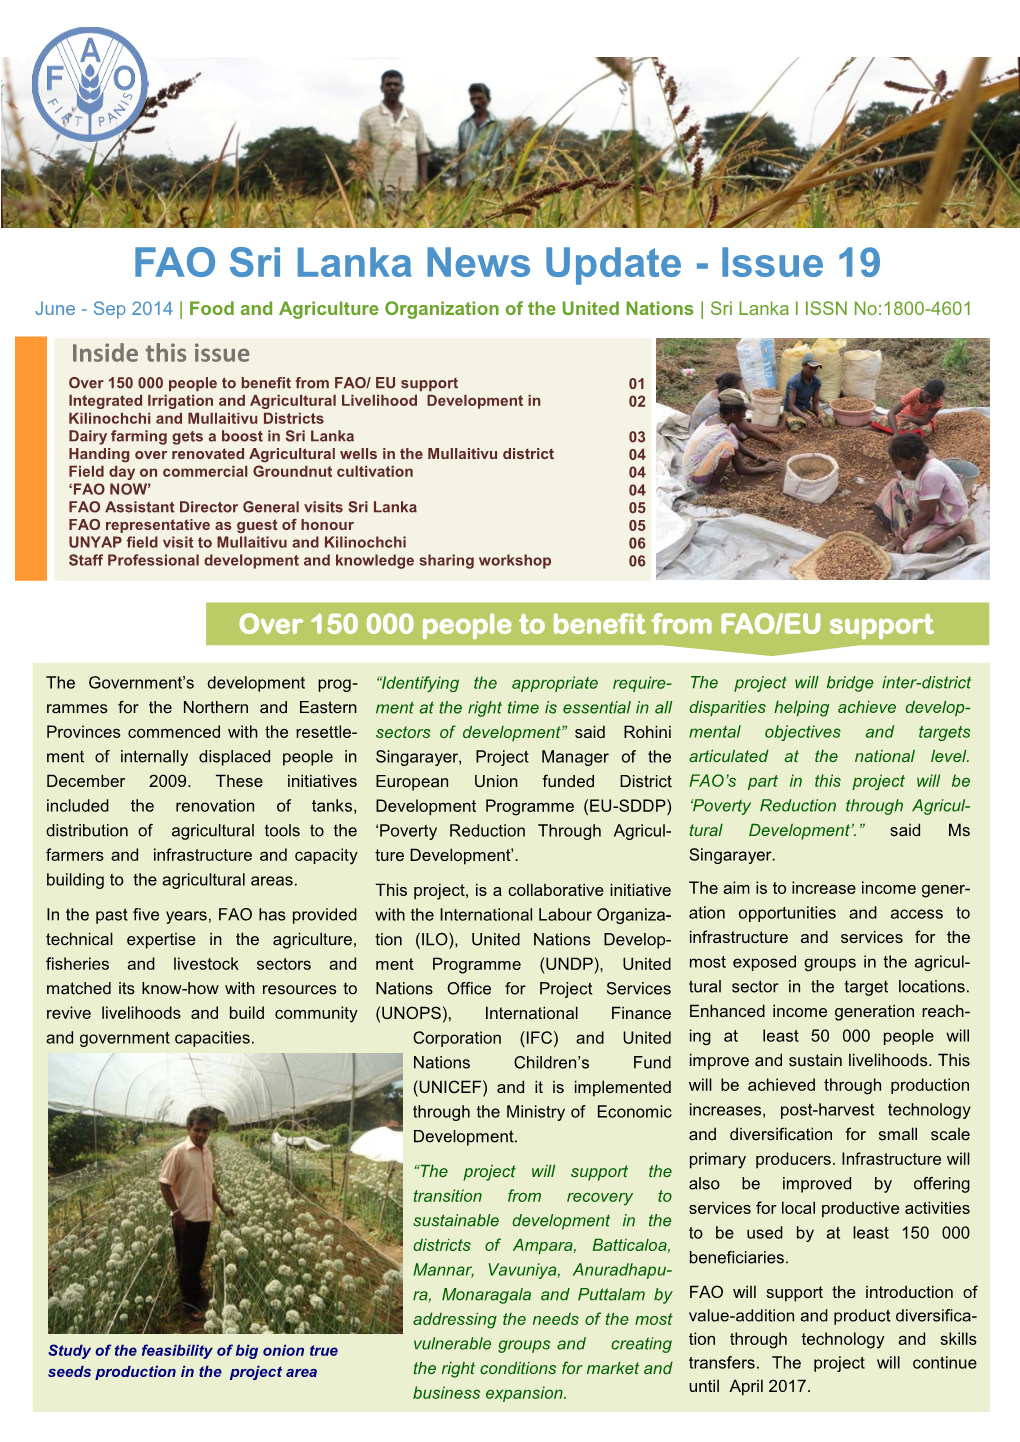 FAO Sri Lanka News Update - Issue 19 June - Sep 2014 | Food and Agriculture Organization of the United Nations | Sri Lanka L ISSN No:1800-4601